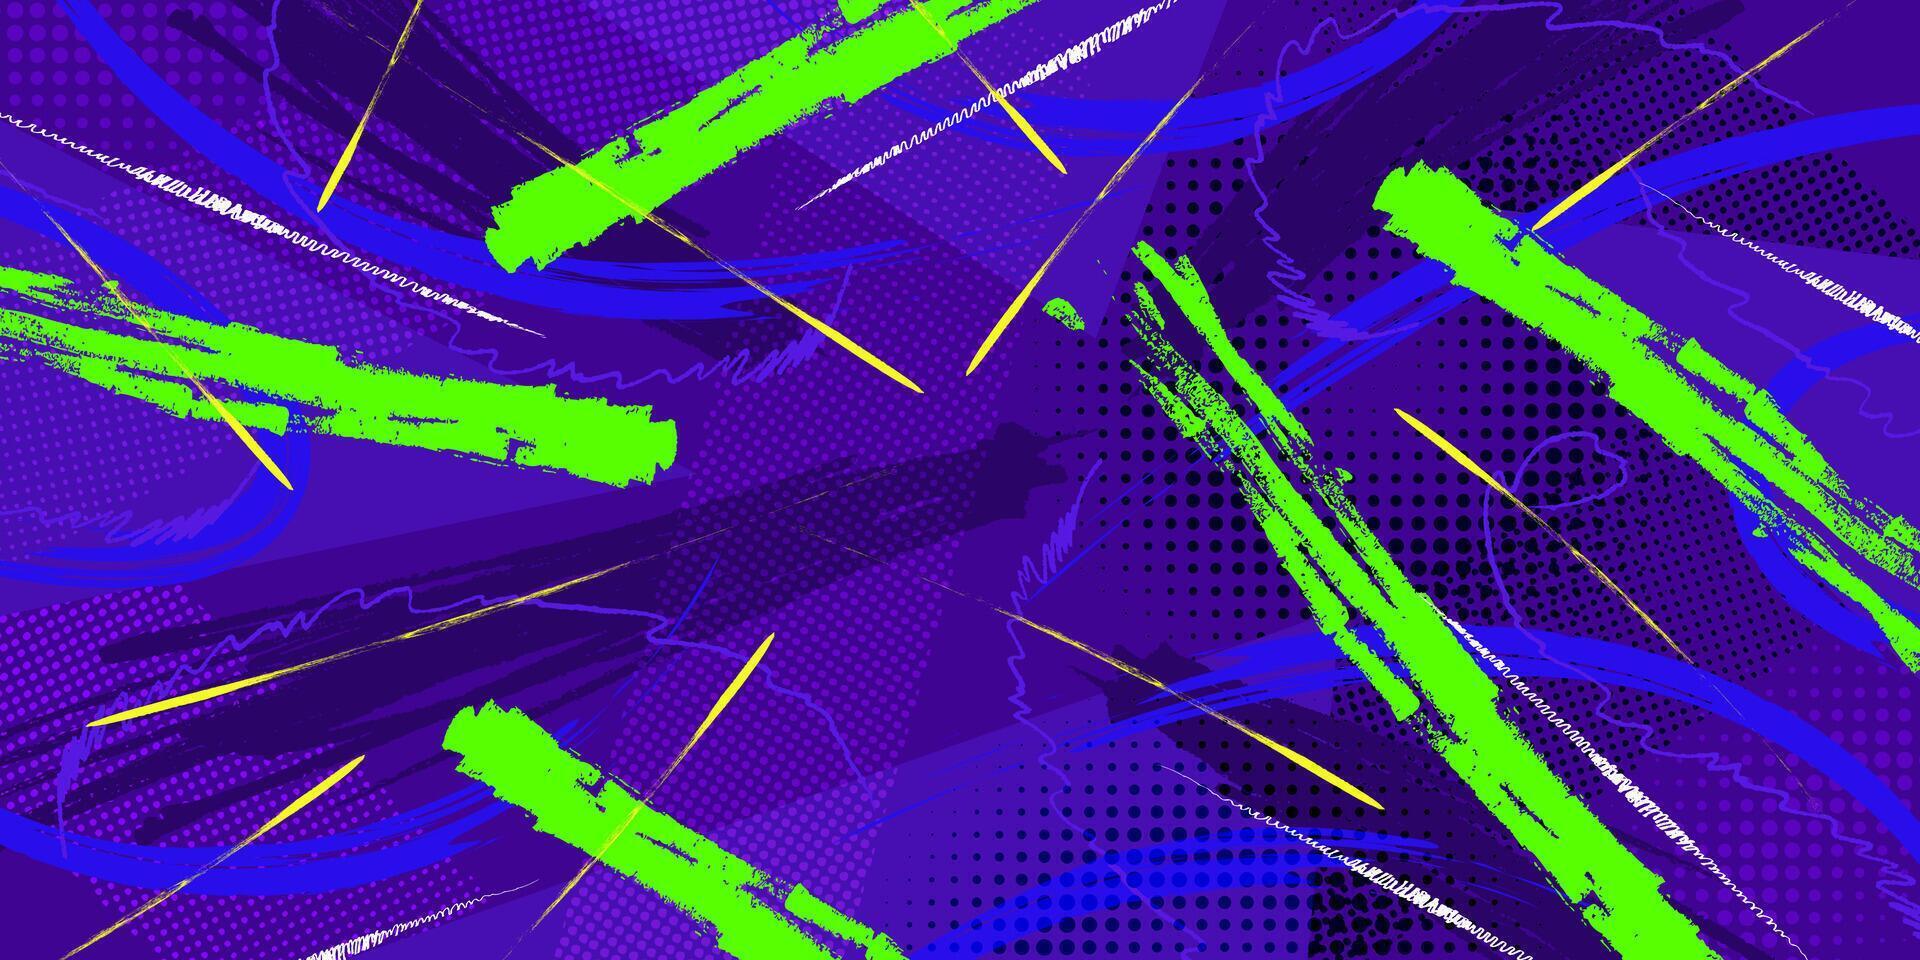 Abstract Brush Background with Sporty Style and Halftone Effect. Brush Stroke Illustration for Banner, Poster, or Sports Background. Scratch and Texture Elements For Design vector